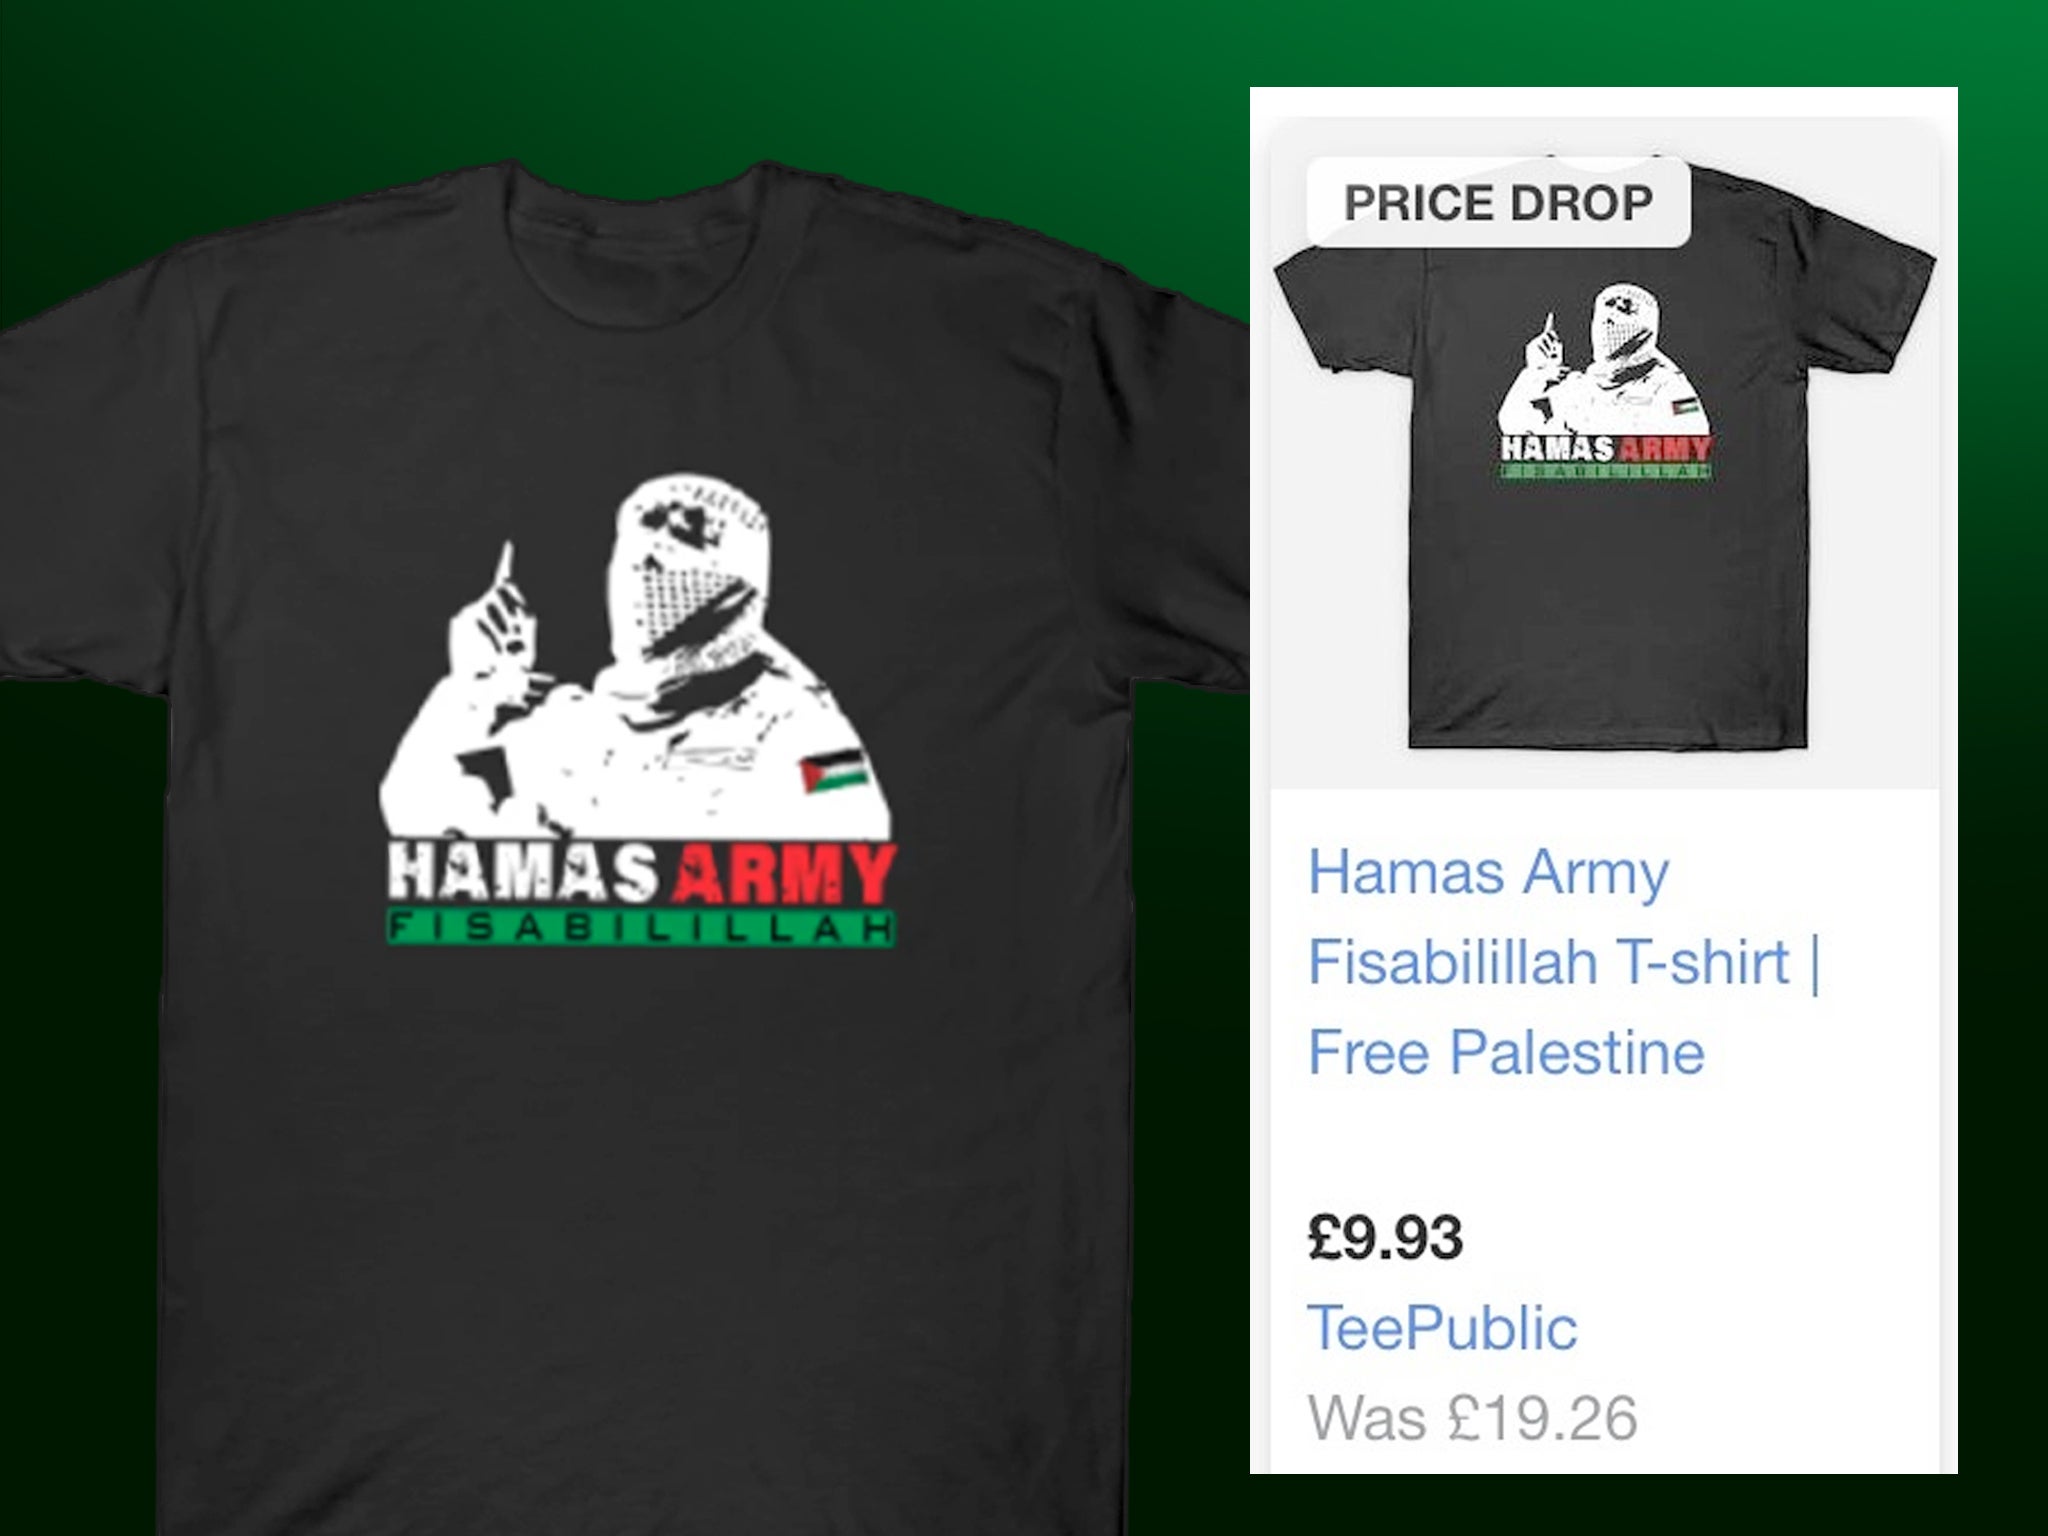 Google profited from sale of Hamas T-shirts – days after UK banned terror  group